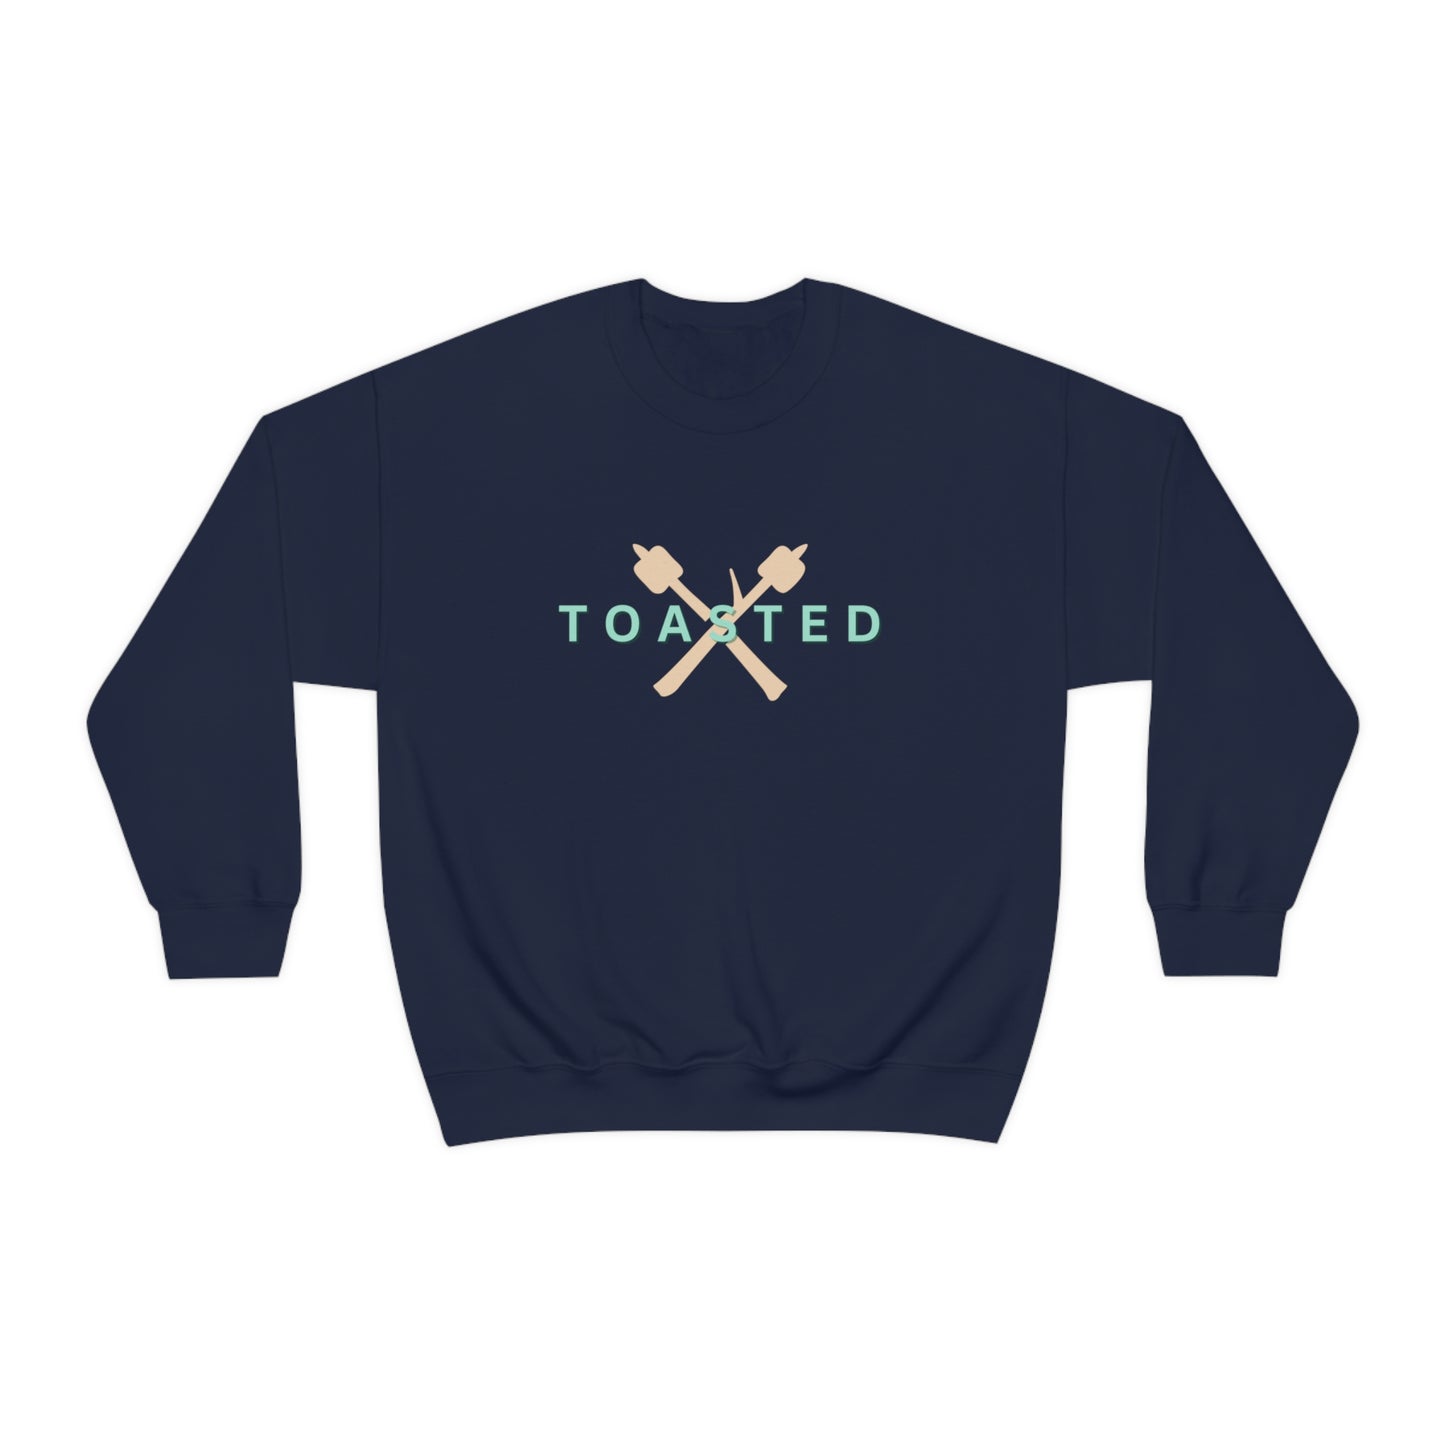 Toasted S'Mores Womens Sweatshirt